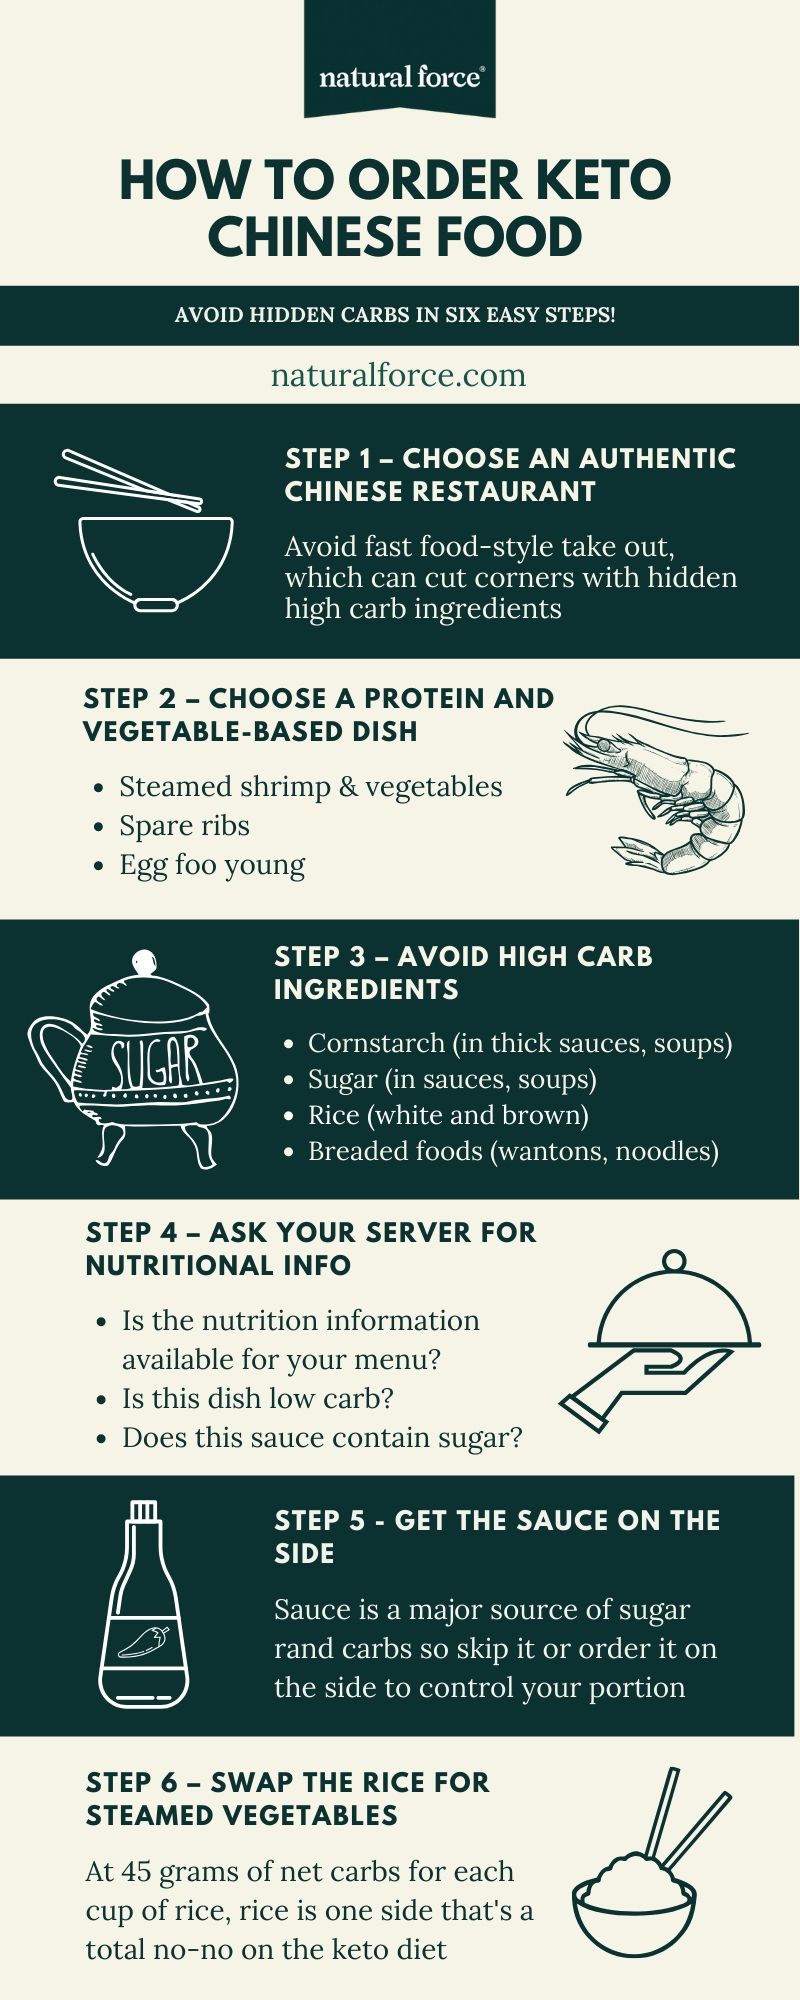 how to order keto chinese food infographic 